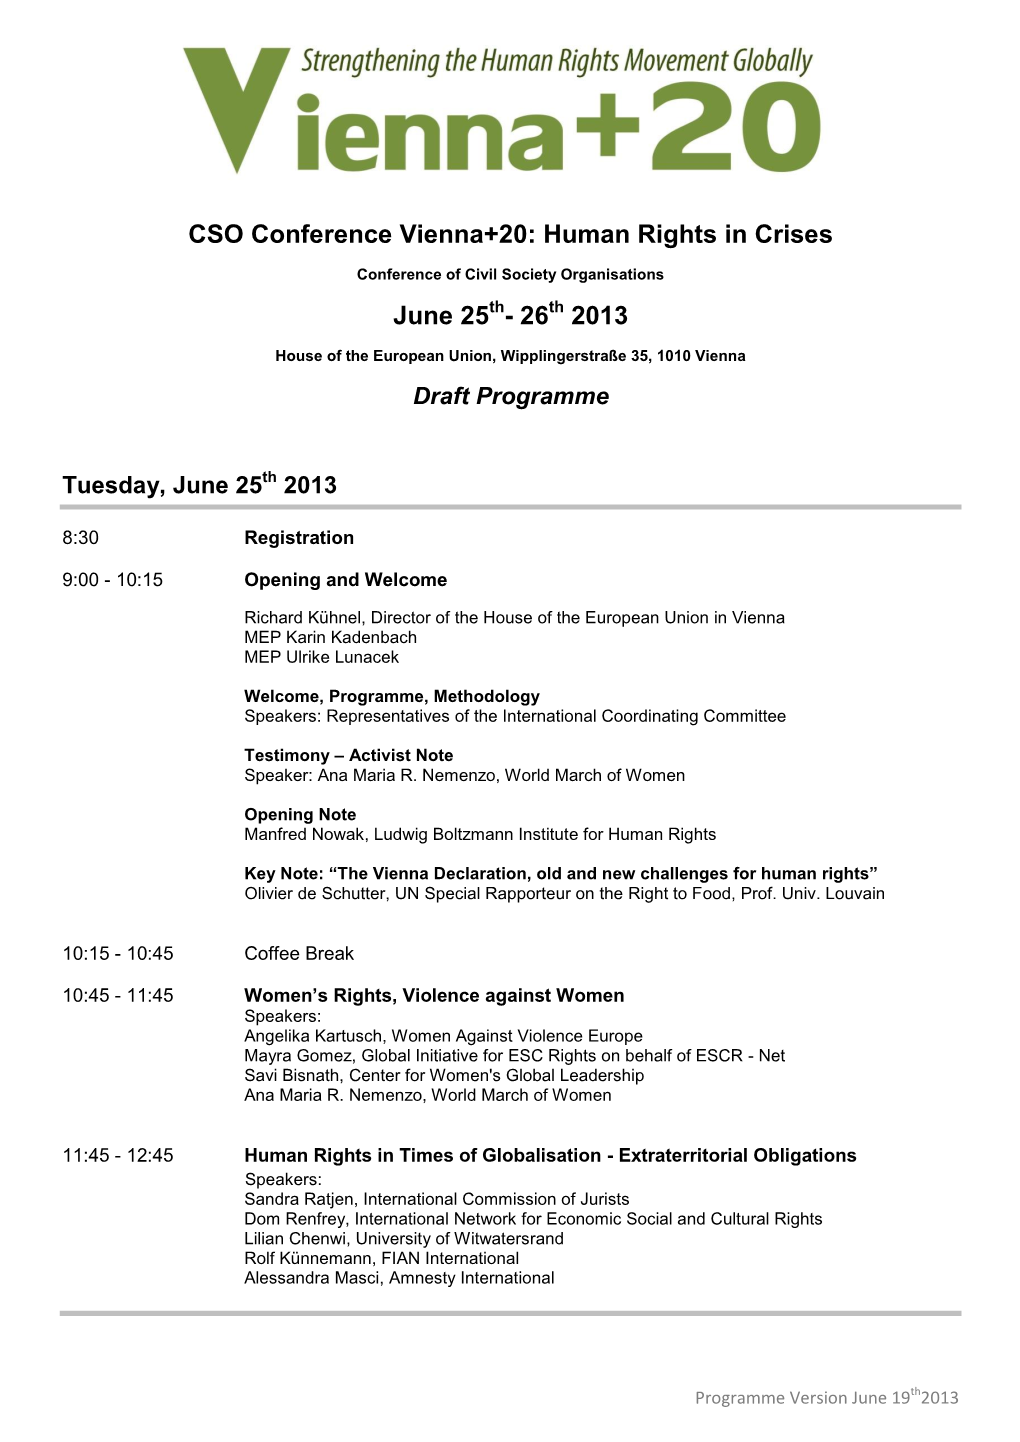 CSO Conference Vienna+20: Human Rights in Crises